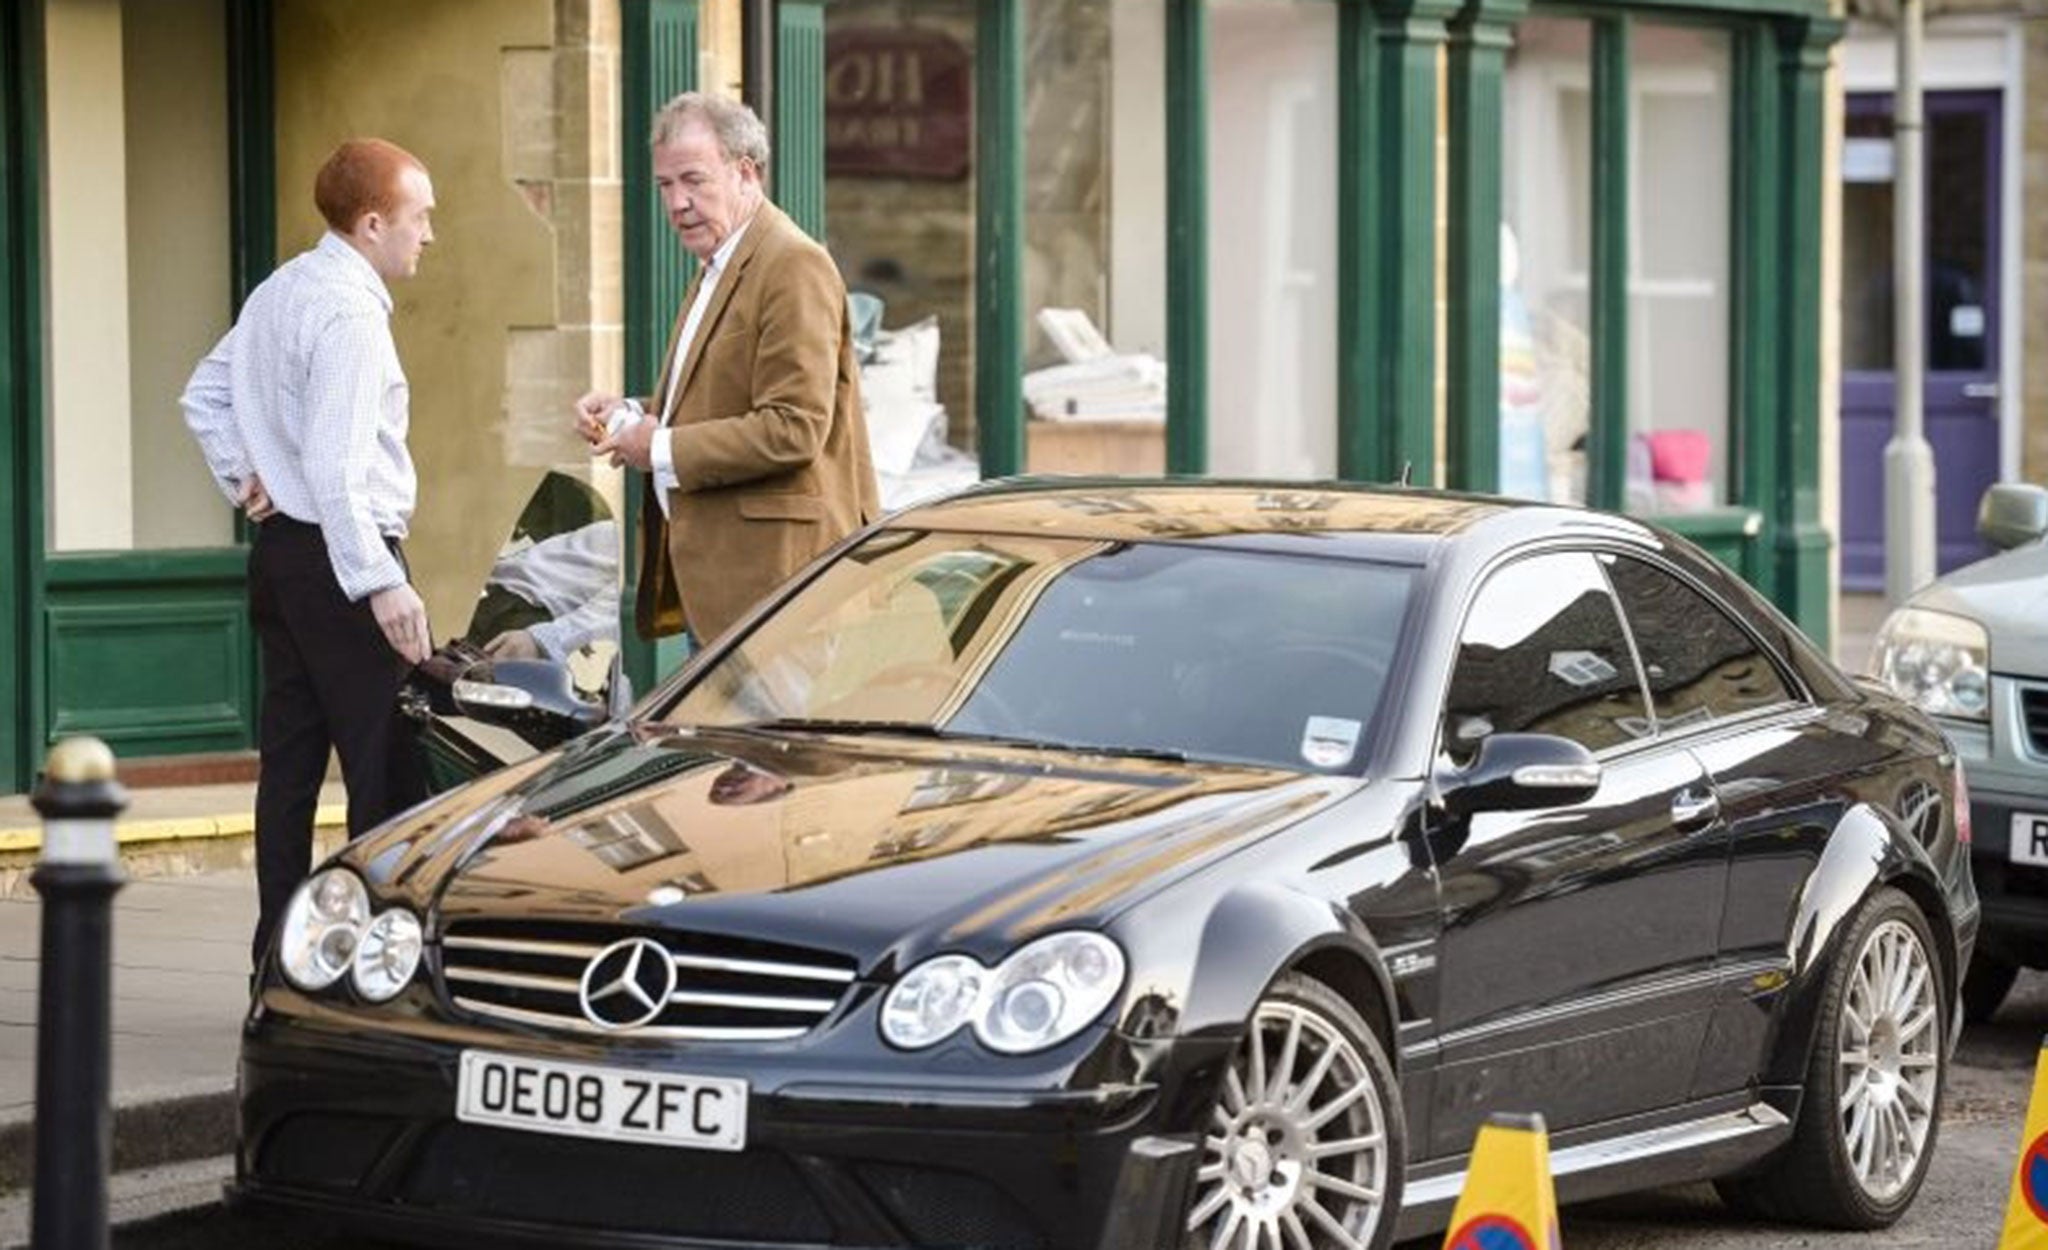 Jeremy Clarkson gets out of his car as he arrives at Chipping Norton